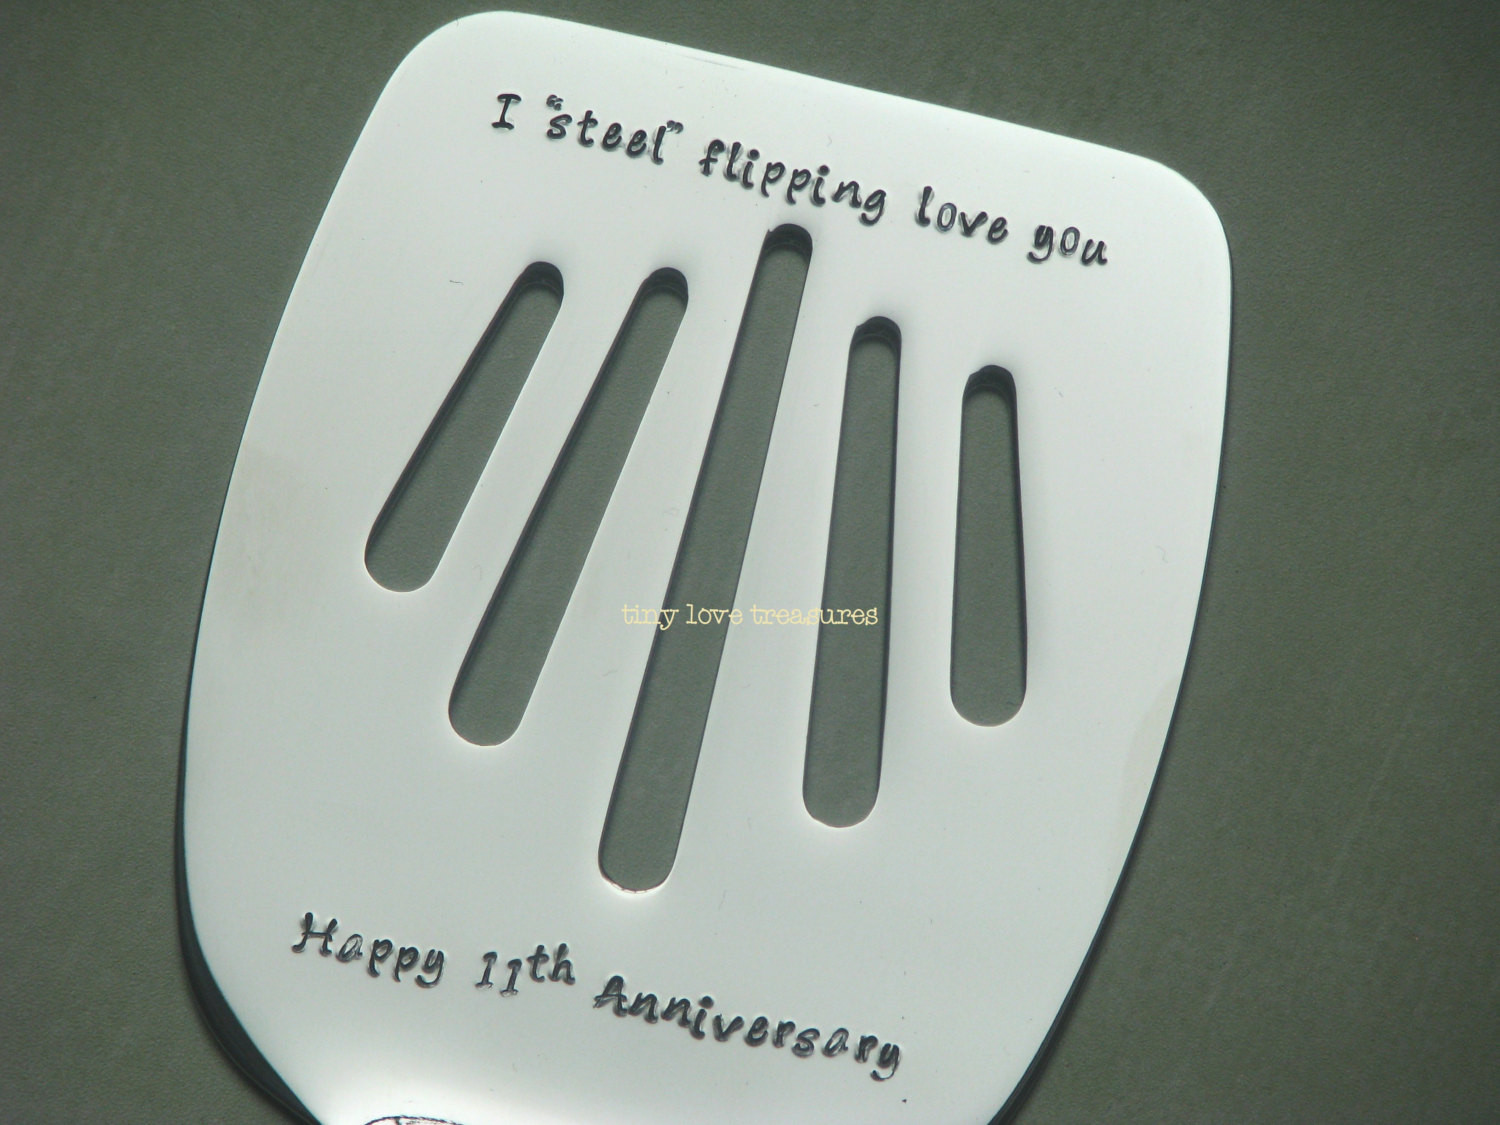 11 Year Anniversary Gift Ideas
 I steel flipping love you 11th Anniversary personalized